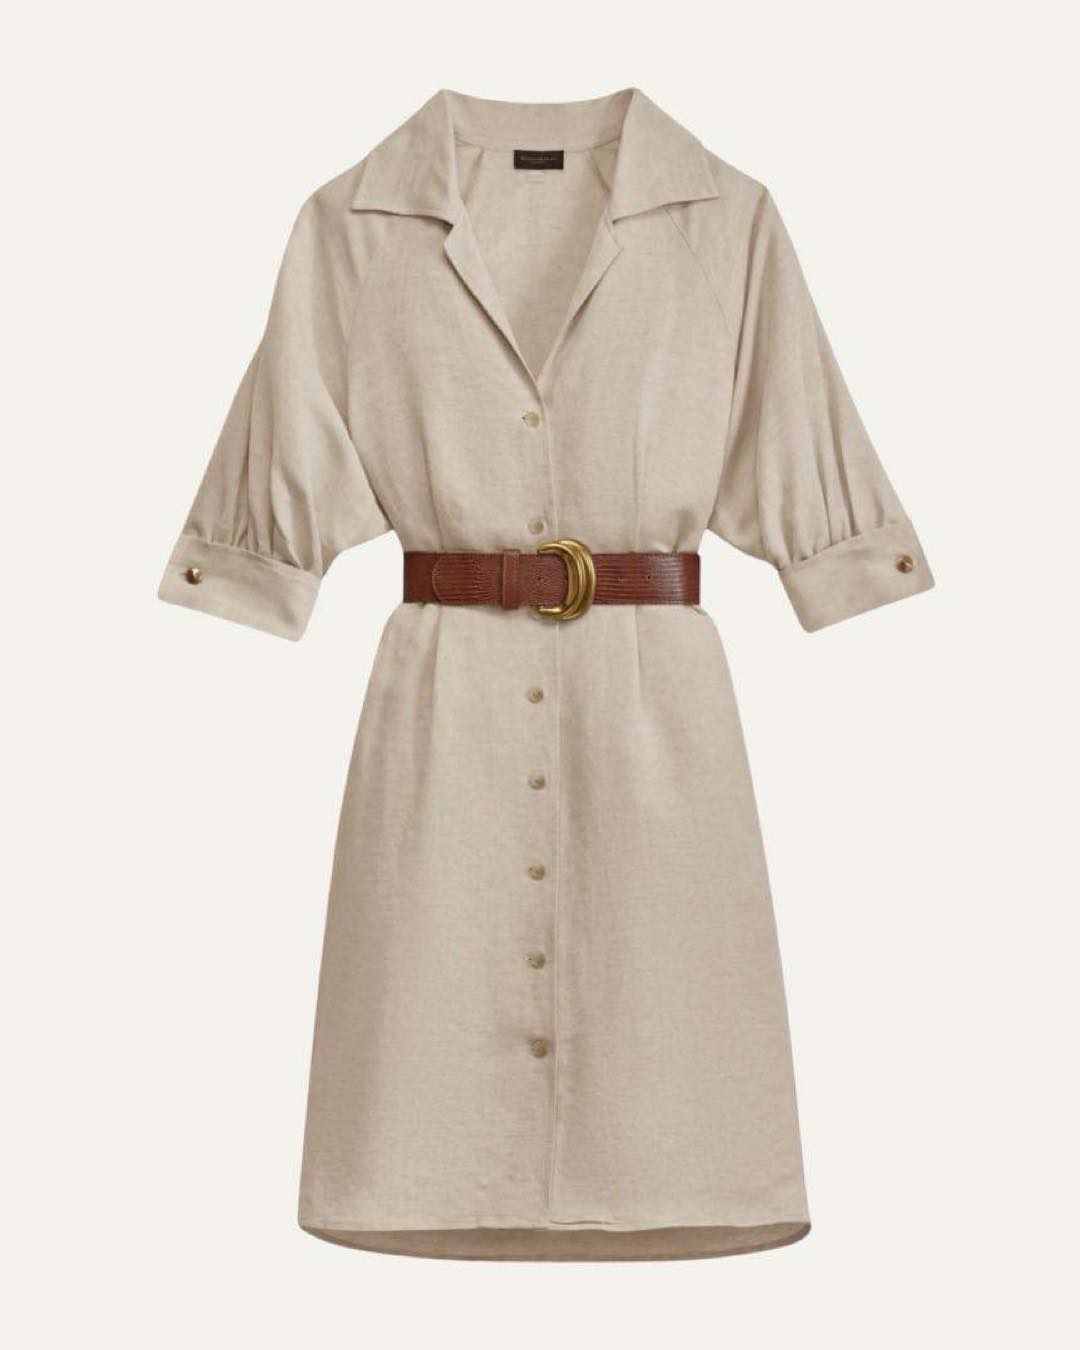 The Perfect Spring Transition Piece – The Classic Shirtdress